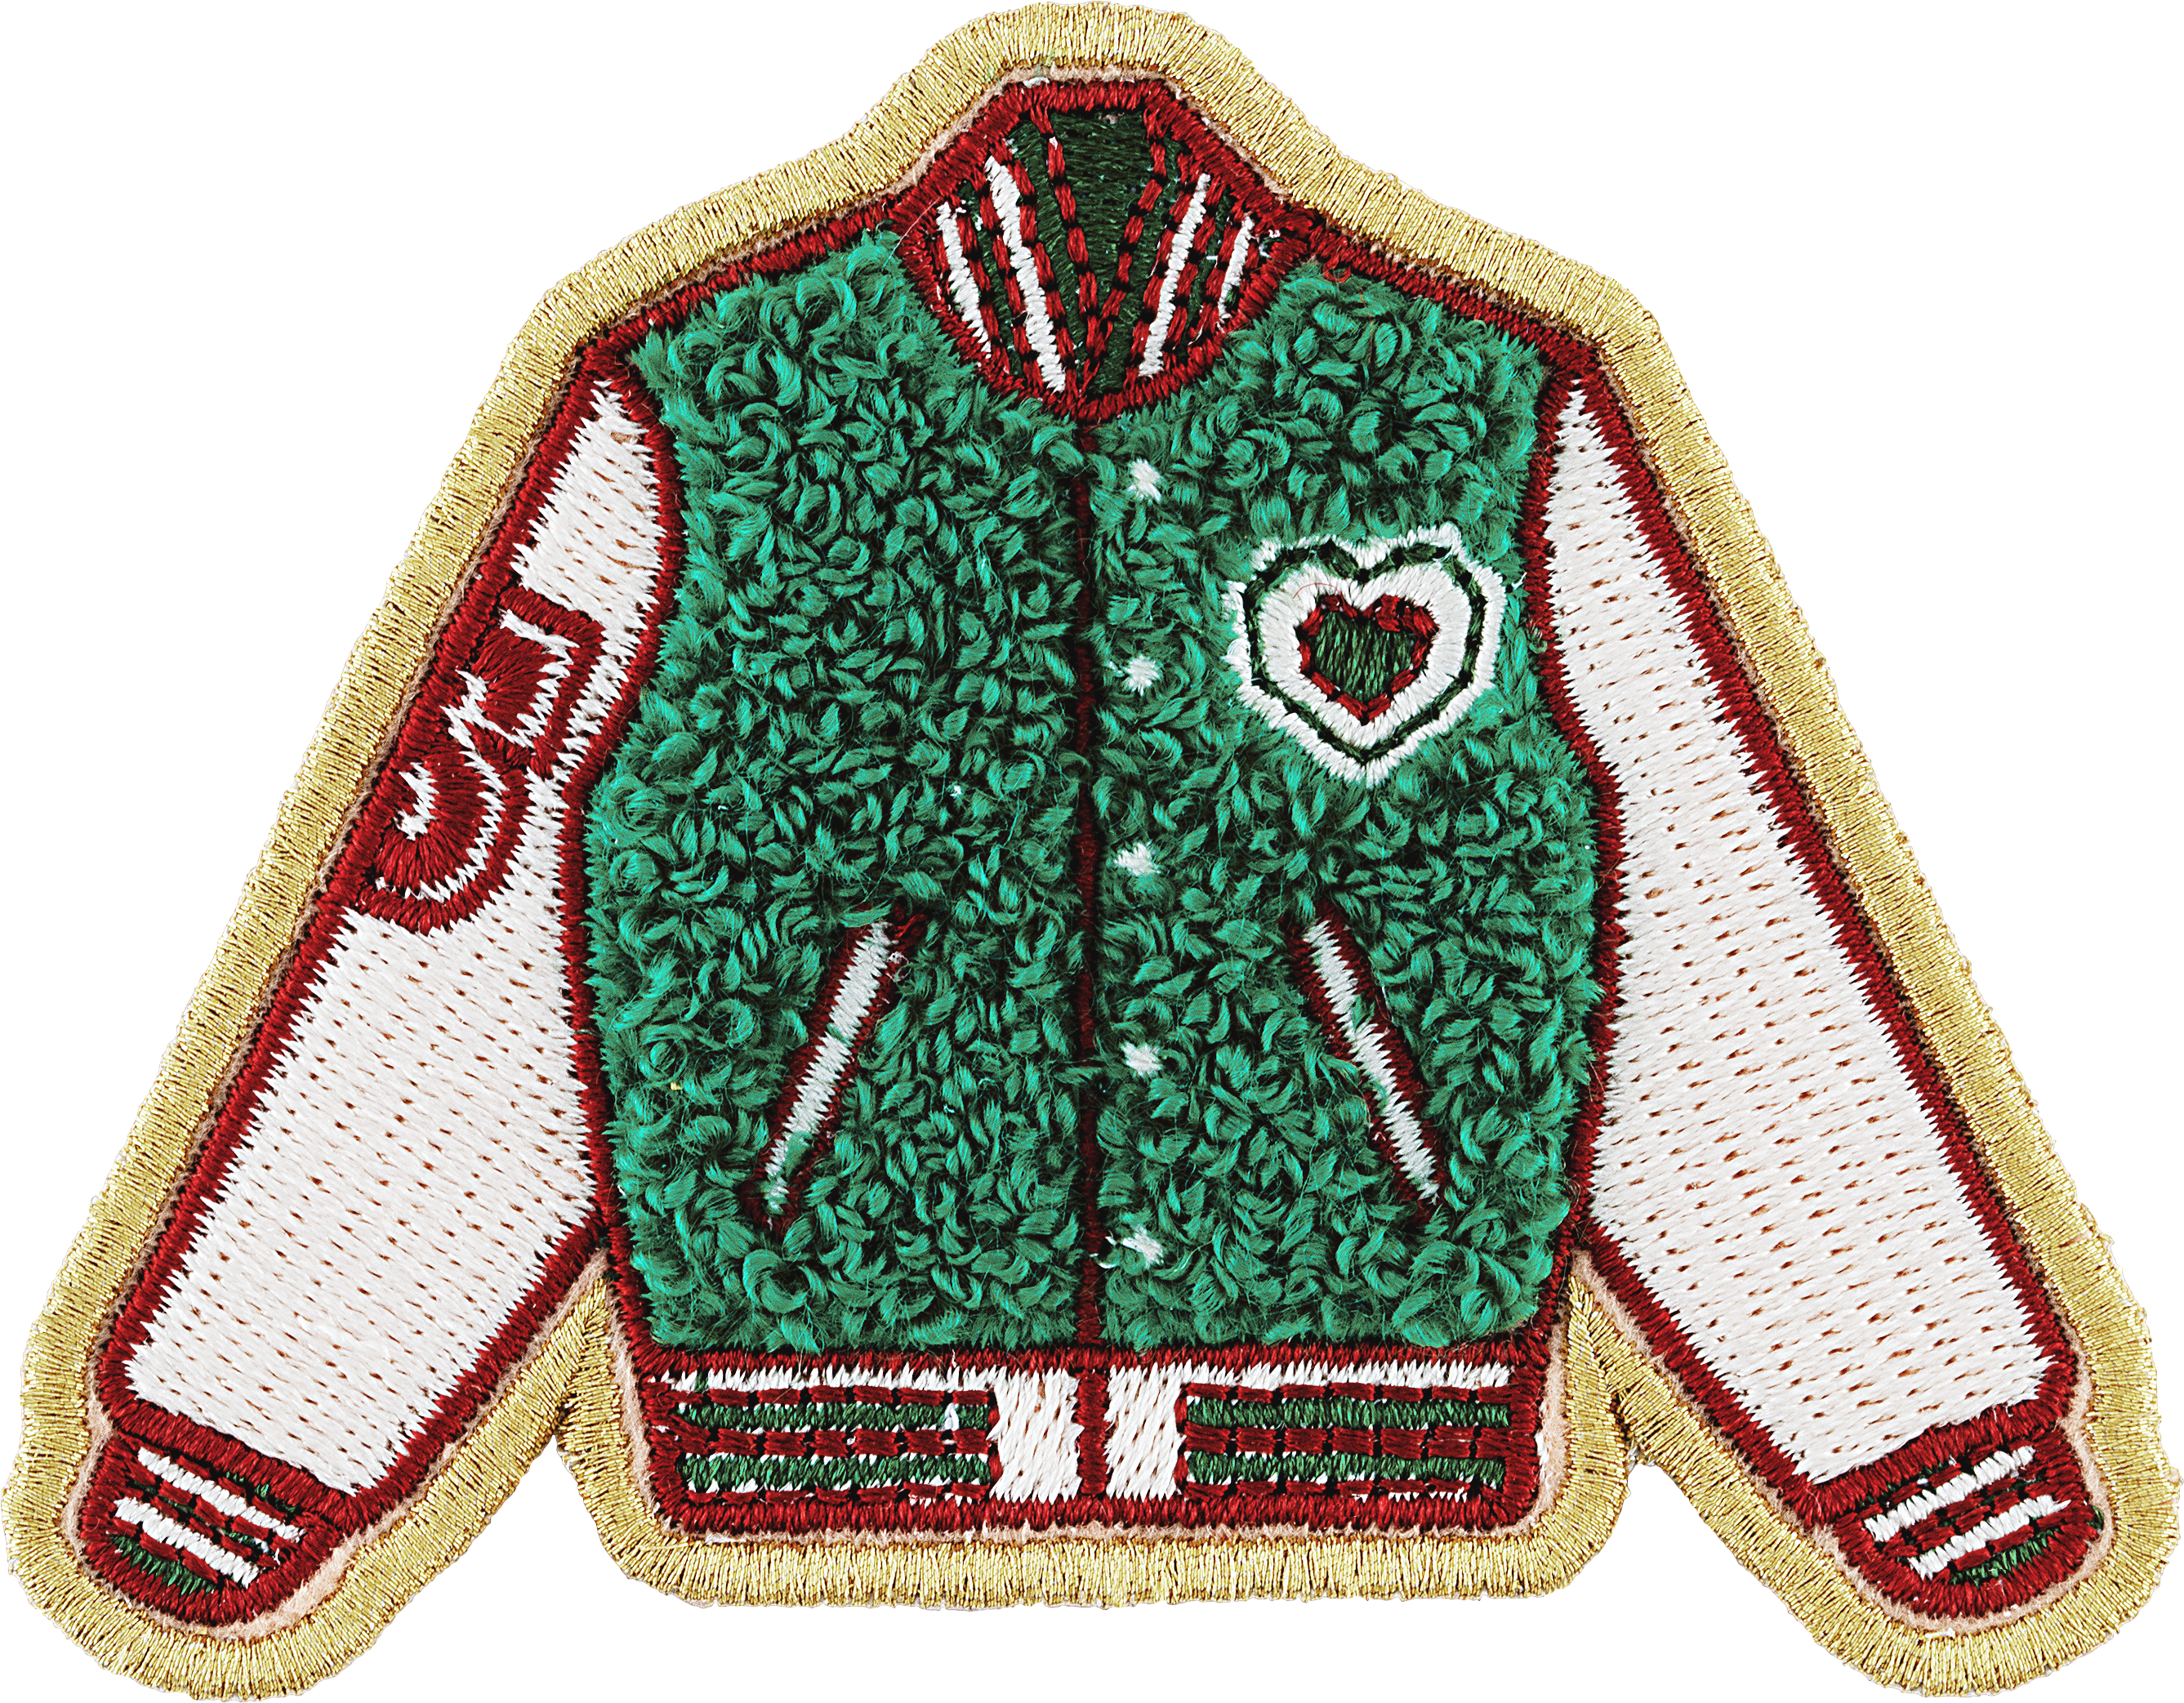 Letterman Jacket Patches  Letterman jacket patches, Patches